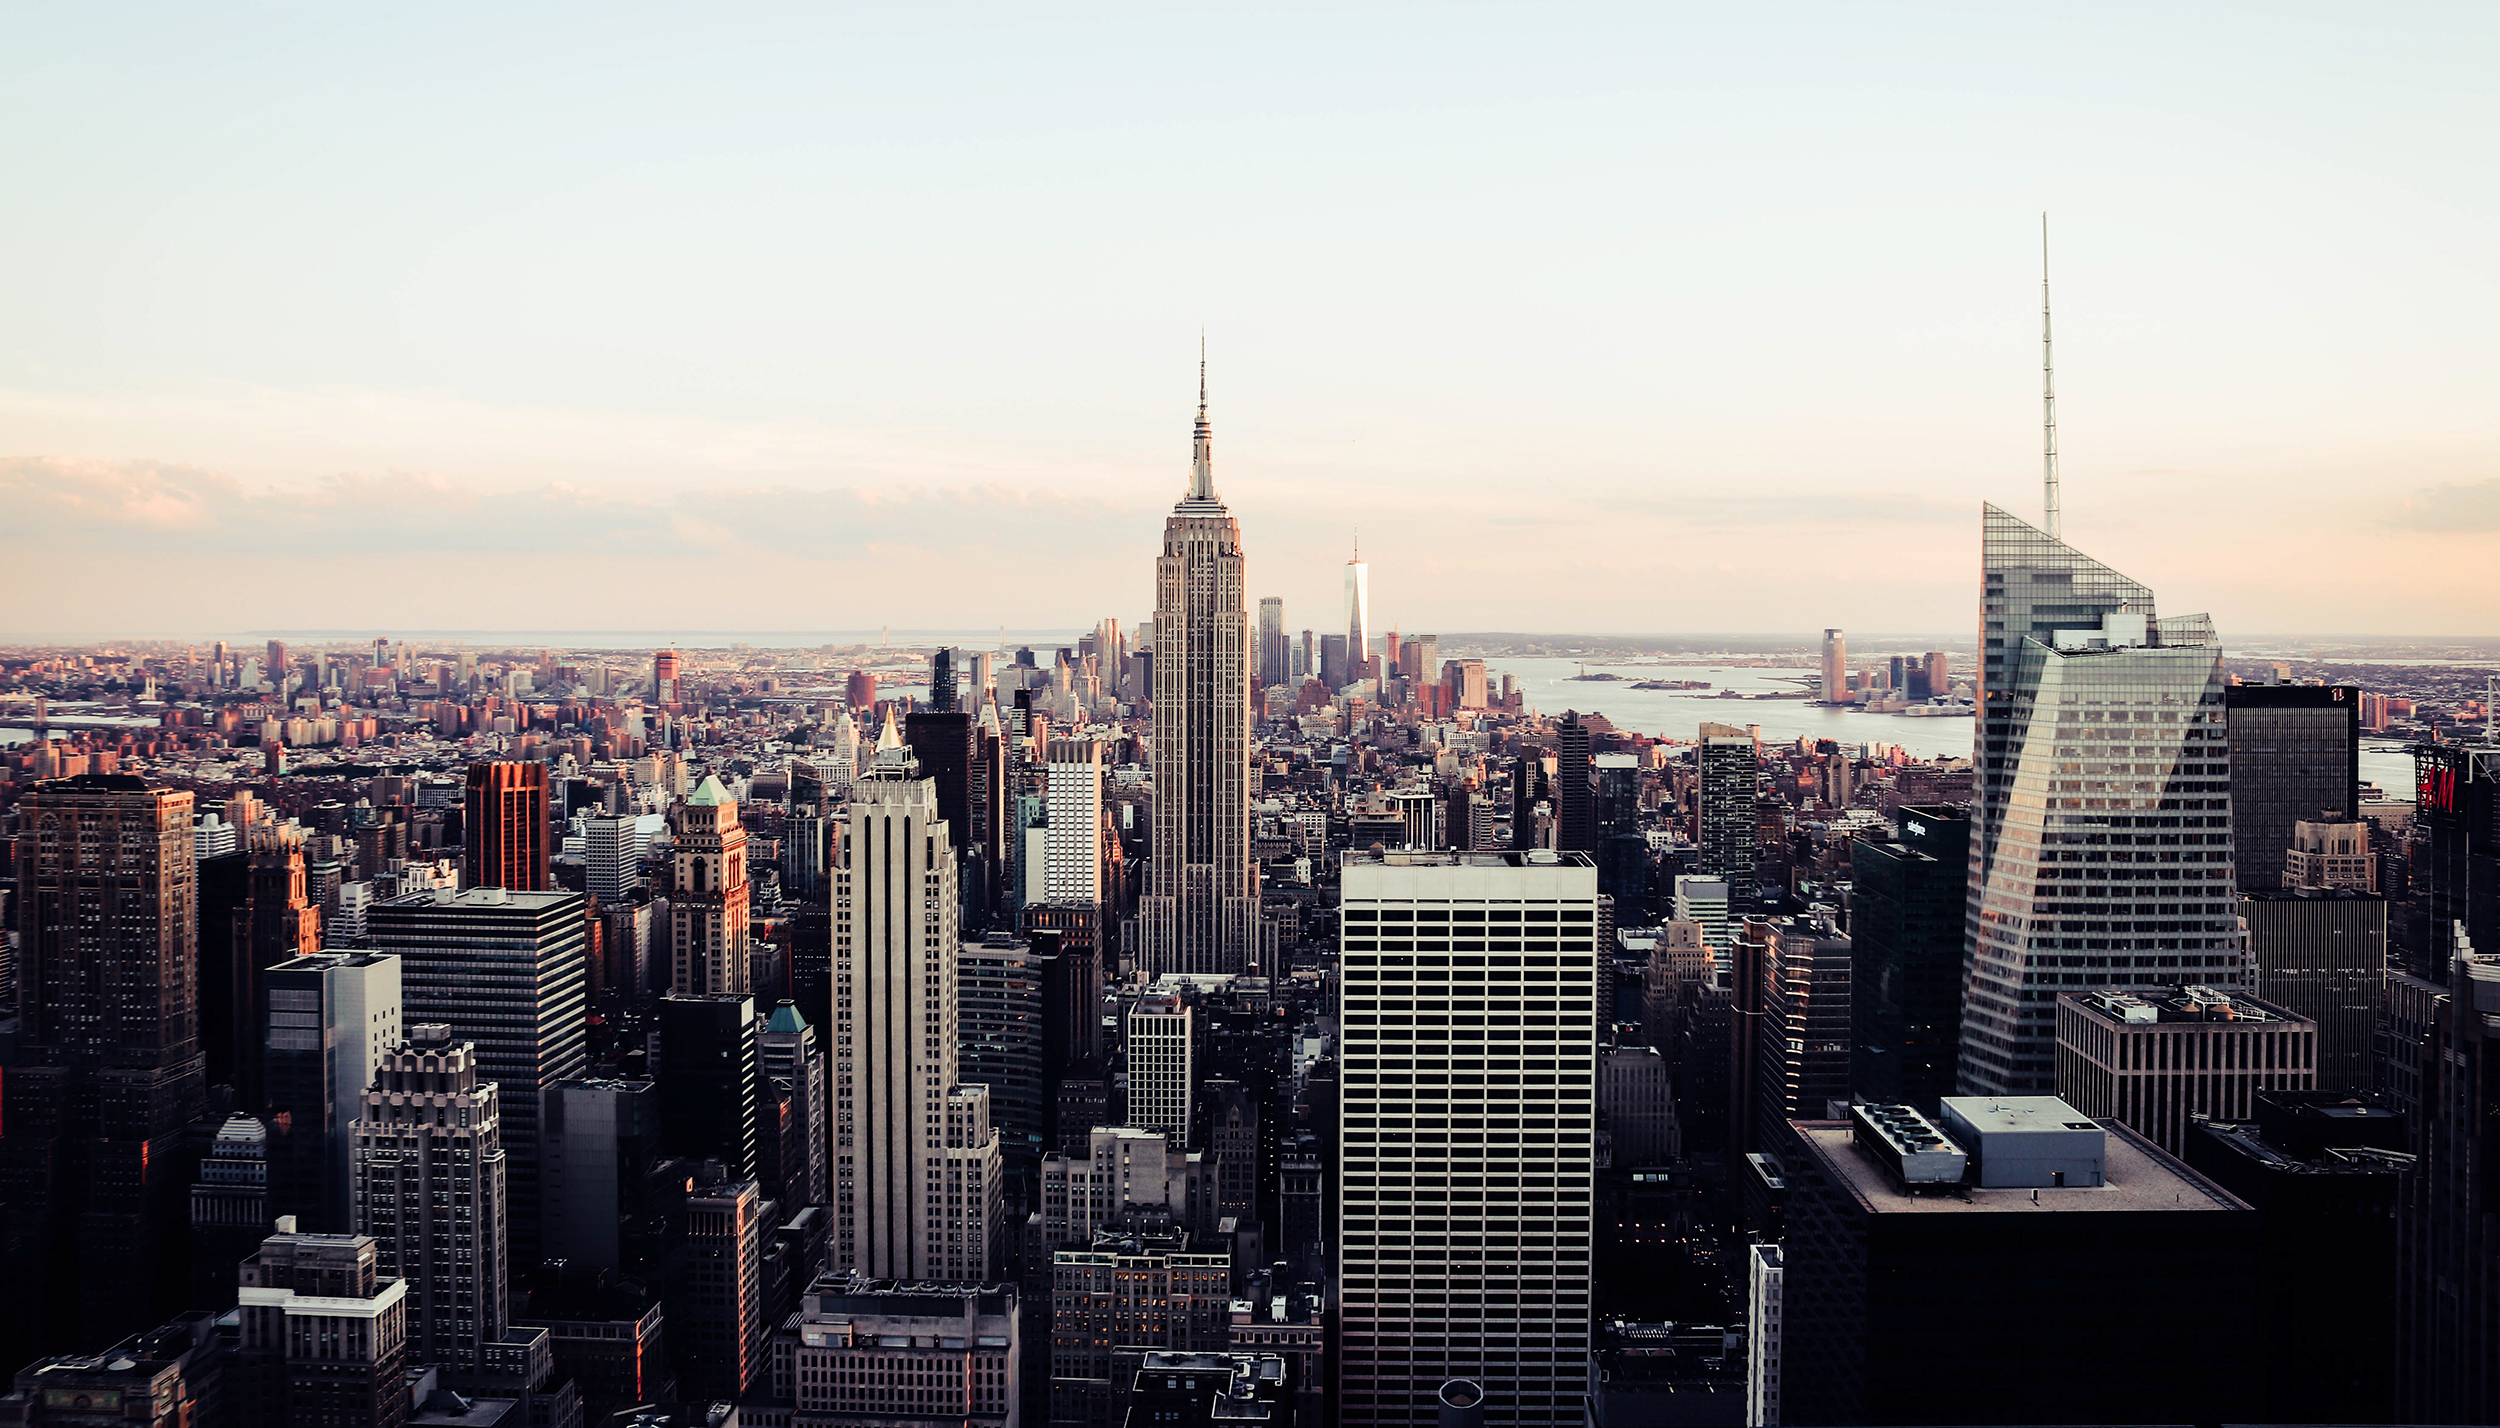 A distance view or New York City featuring a clear sky and the Empire State Building.